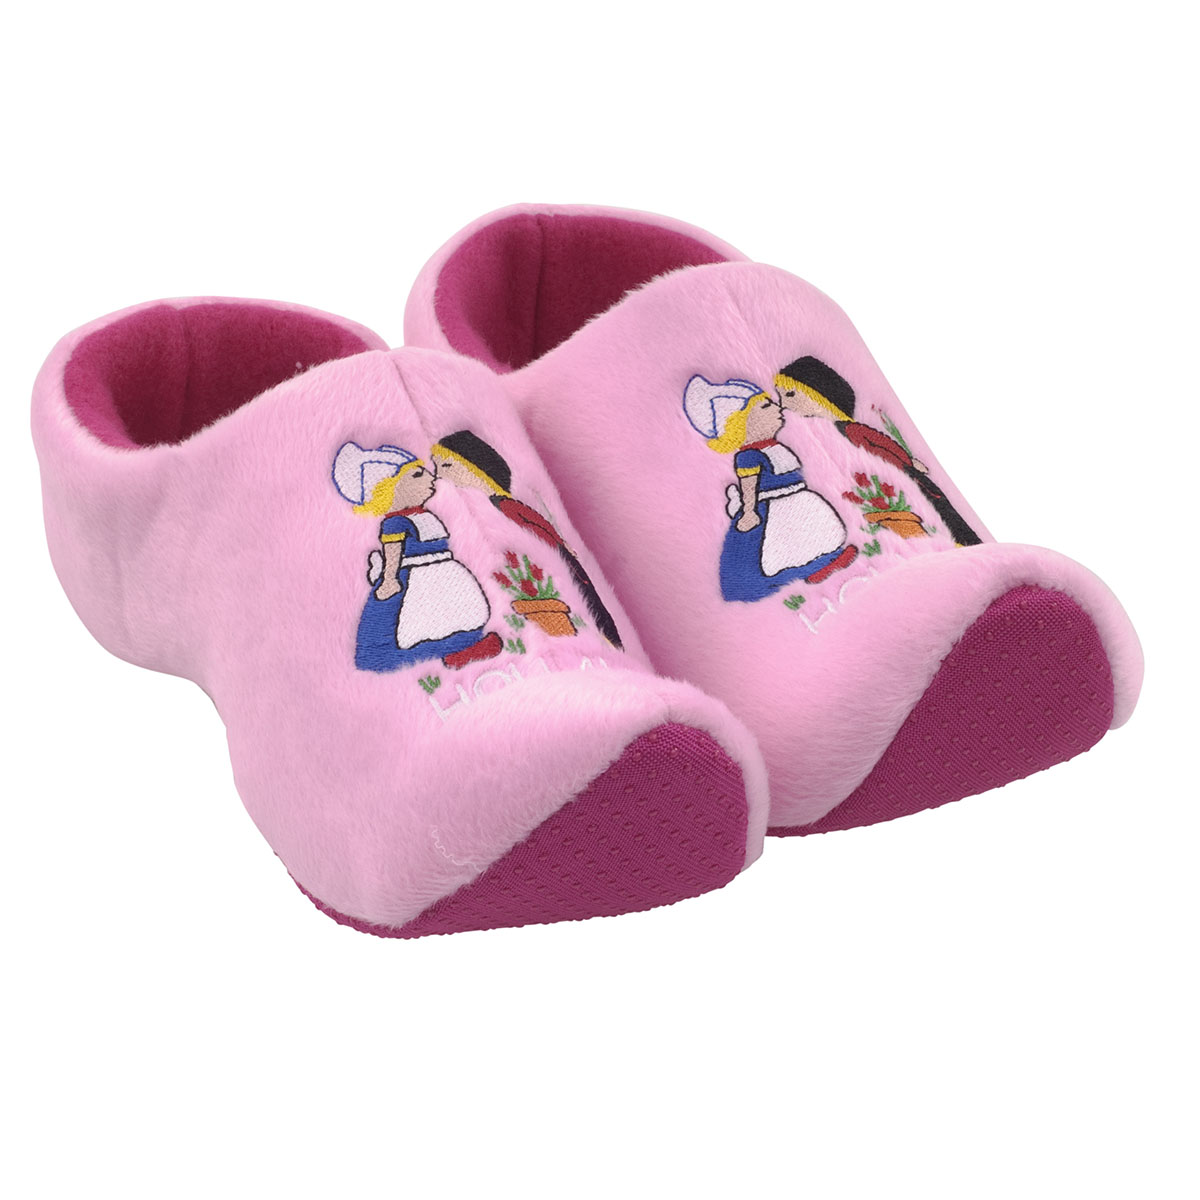 Looking for pink clogs or wooden shoe slippers? Order online or in our shop